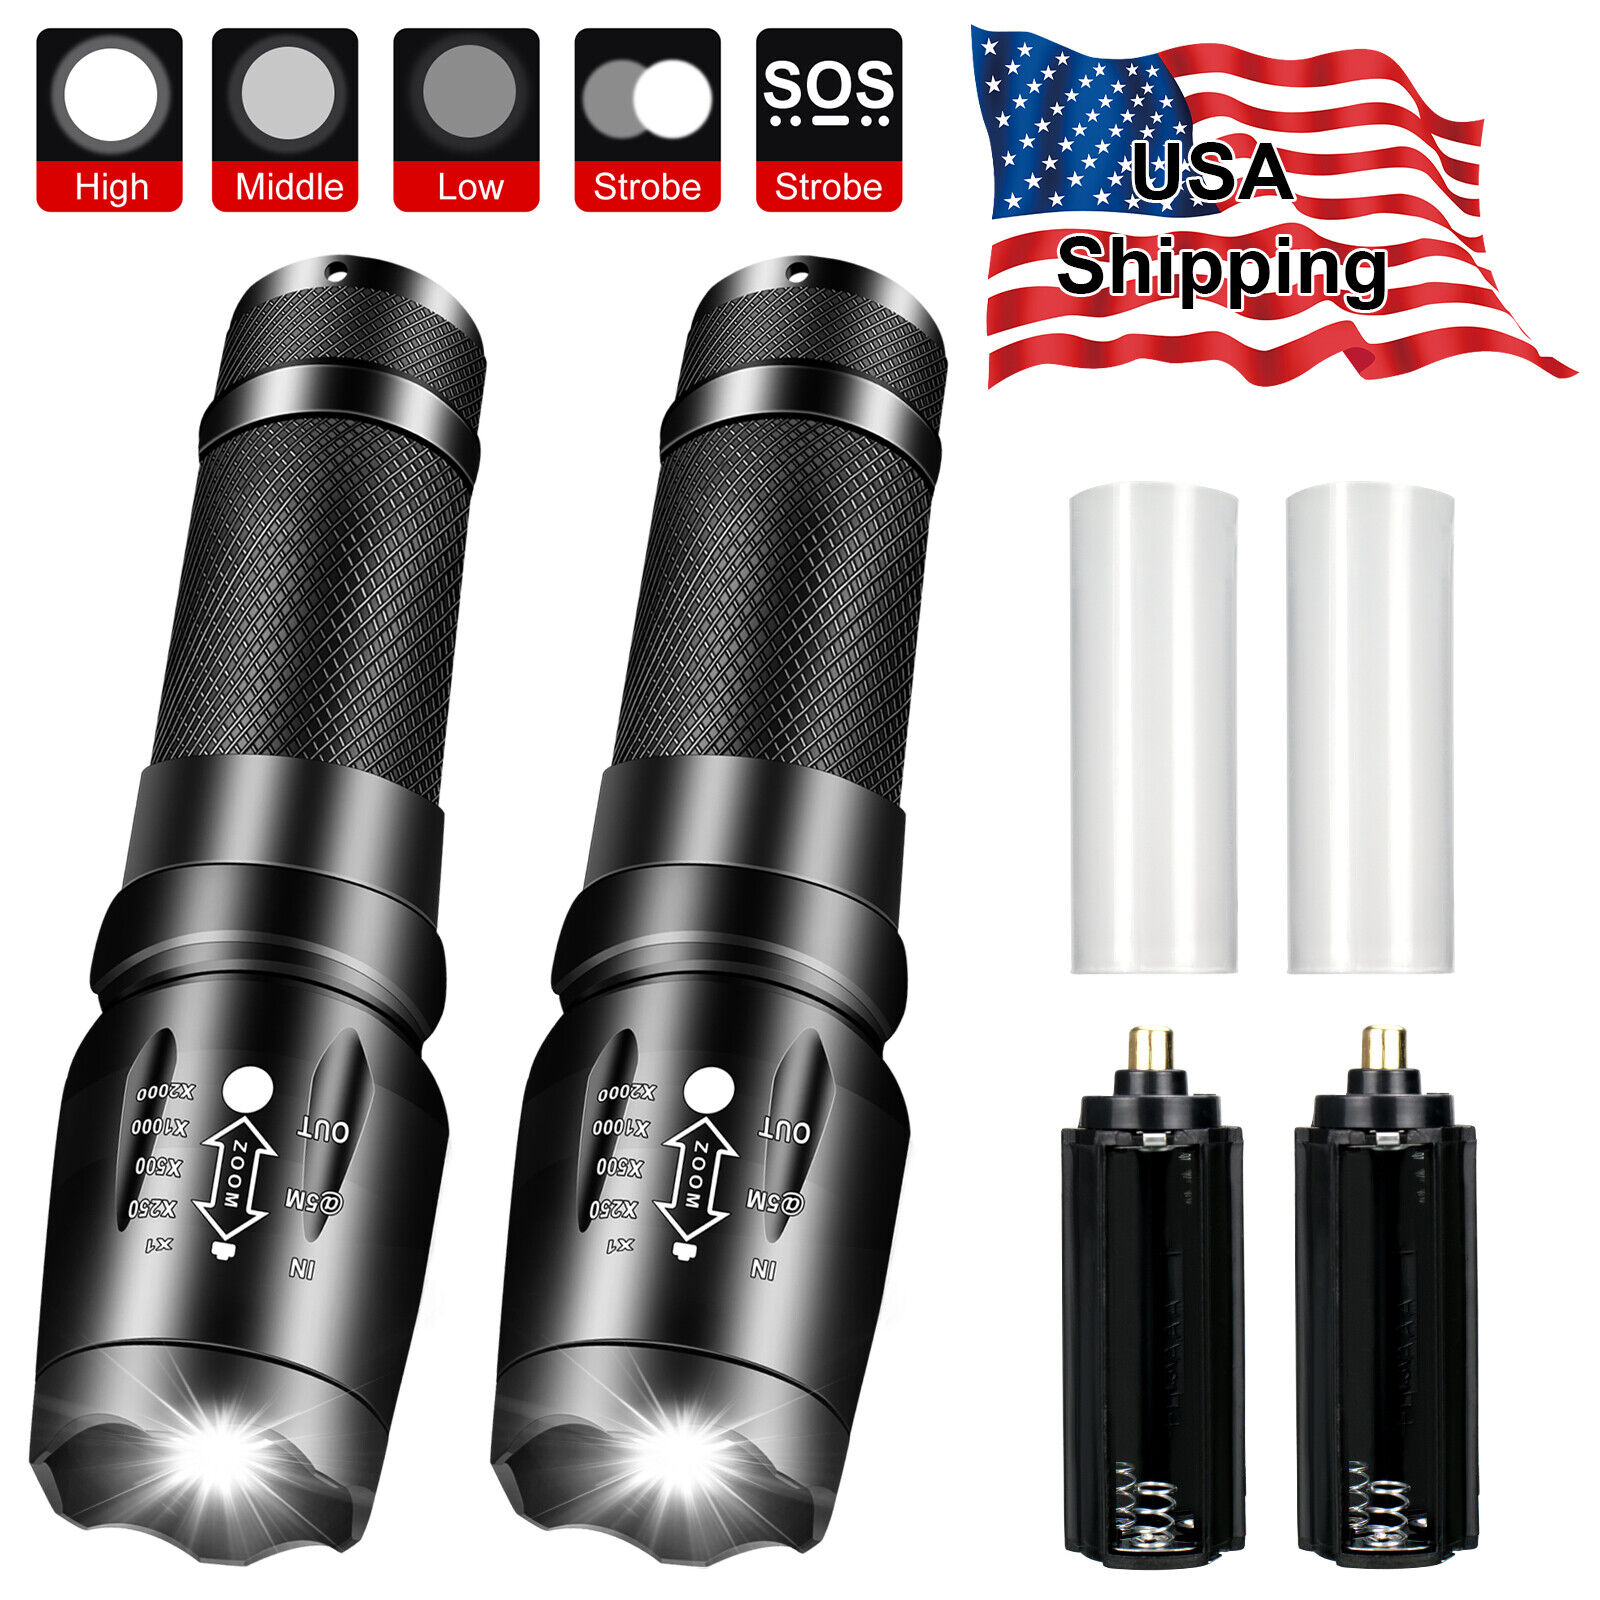 2 Pack Super Bright LED Tactical Flashlight Military 26650 AAA Torch Lamp Zoom